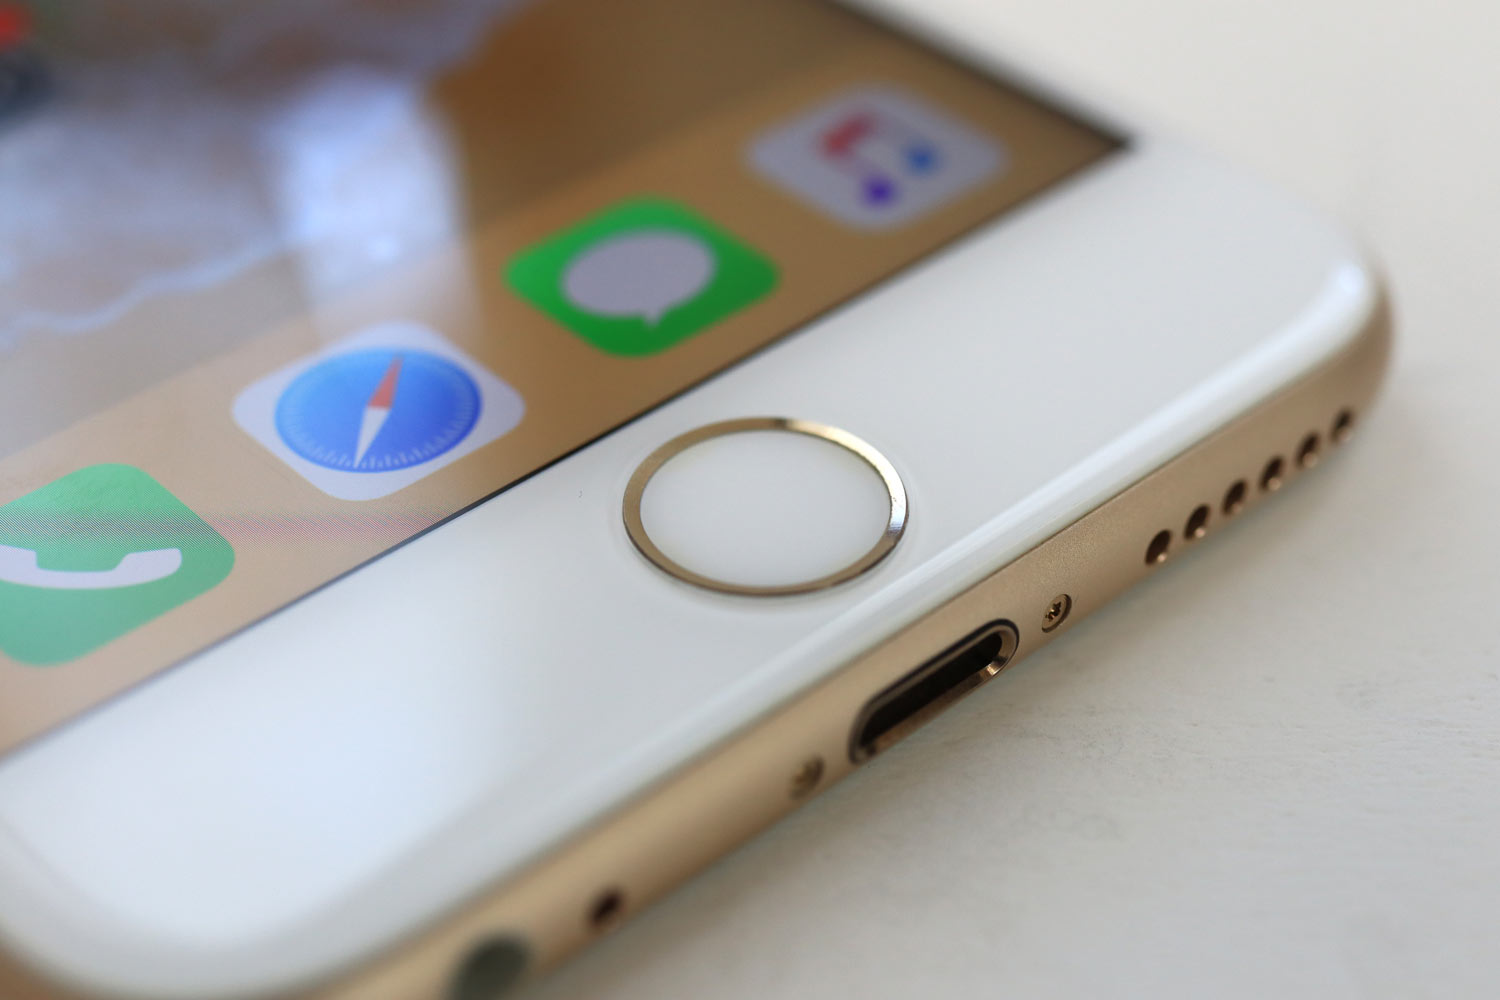 iPhone 6s Touch ID